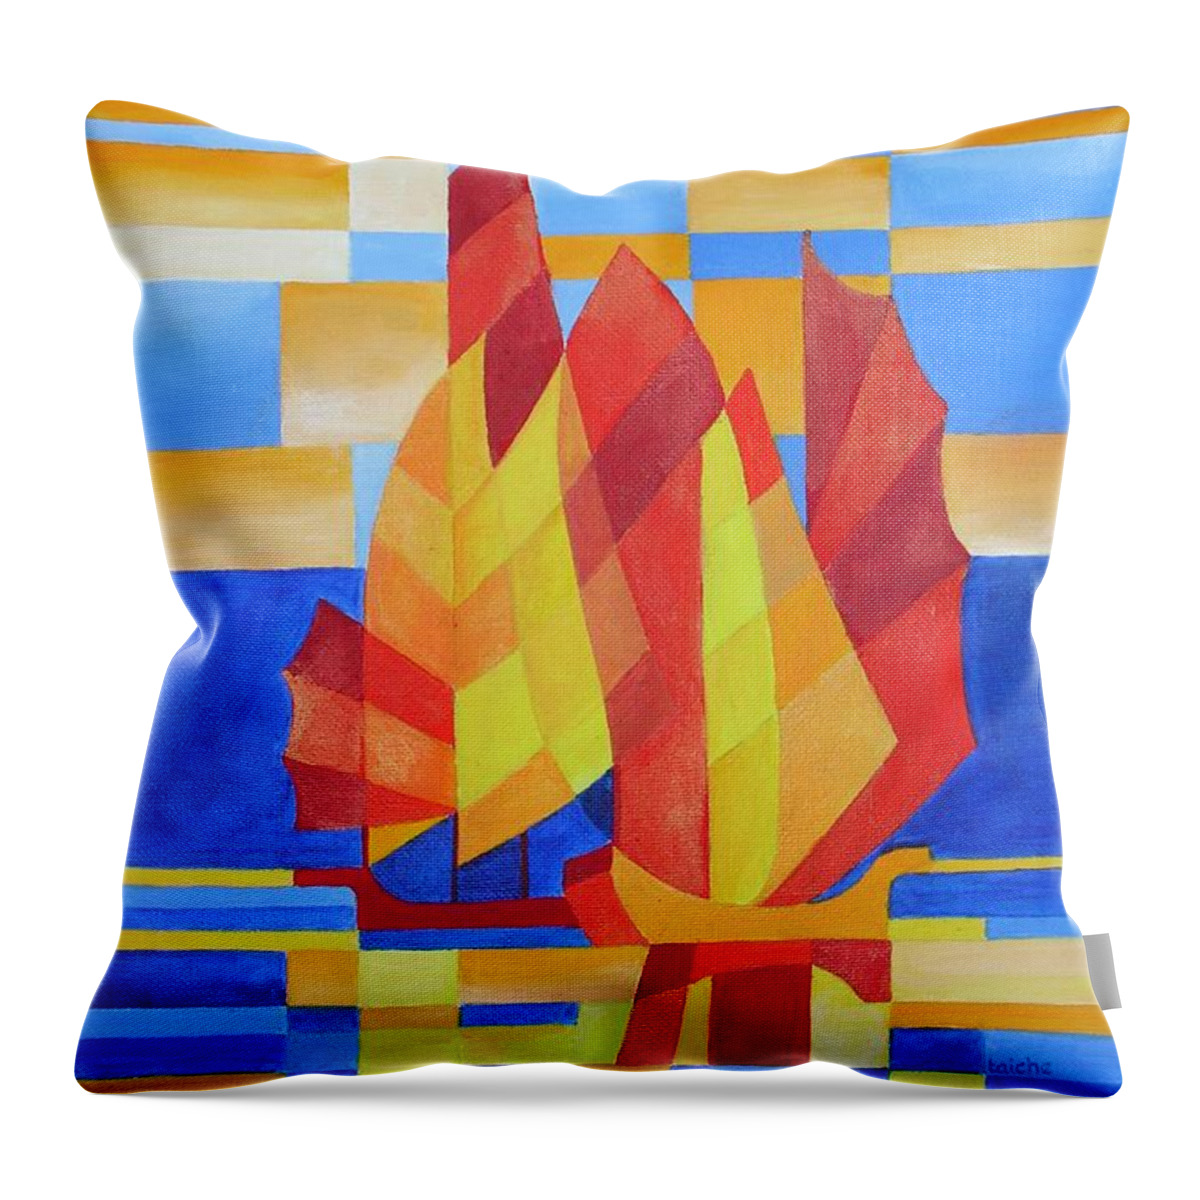 Sailboat Throw Pillow featuring the painting Sailing On The Seven Seas So Blue by Taiche Acrylic Art